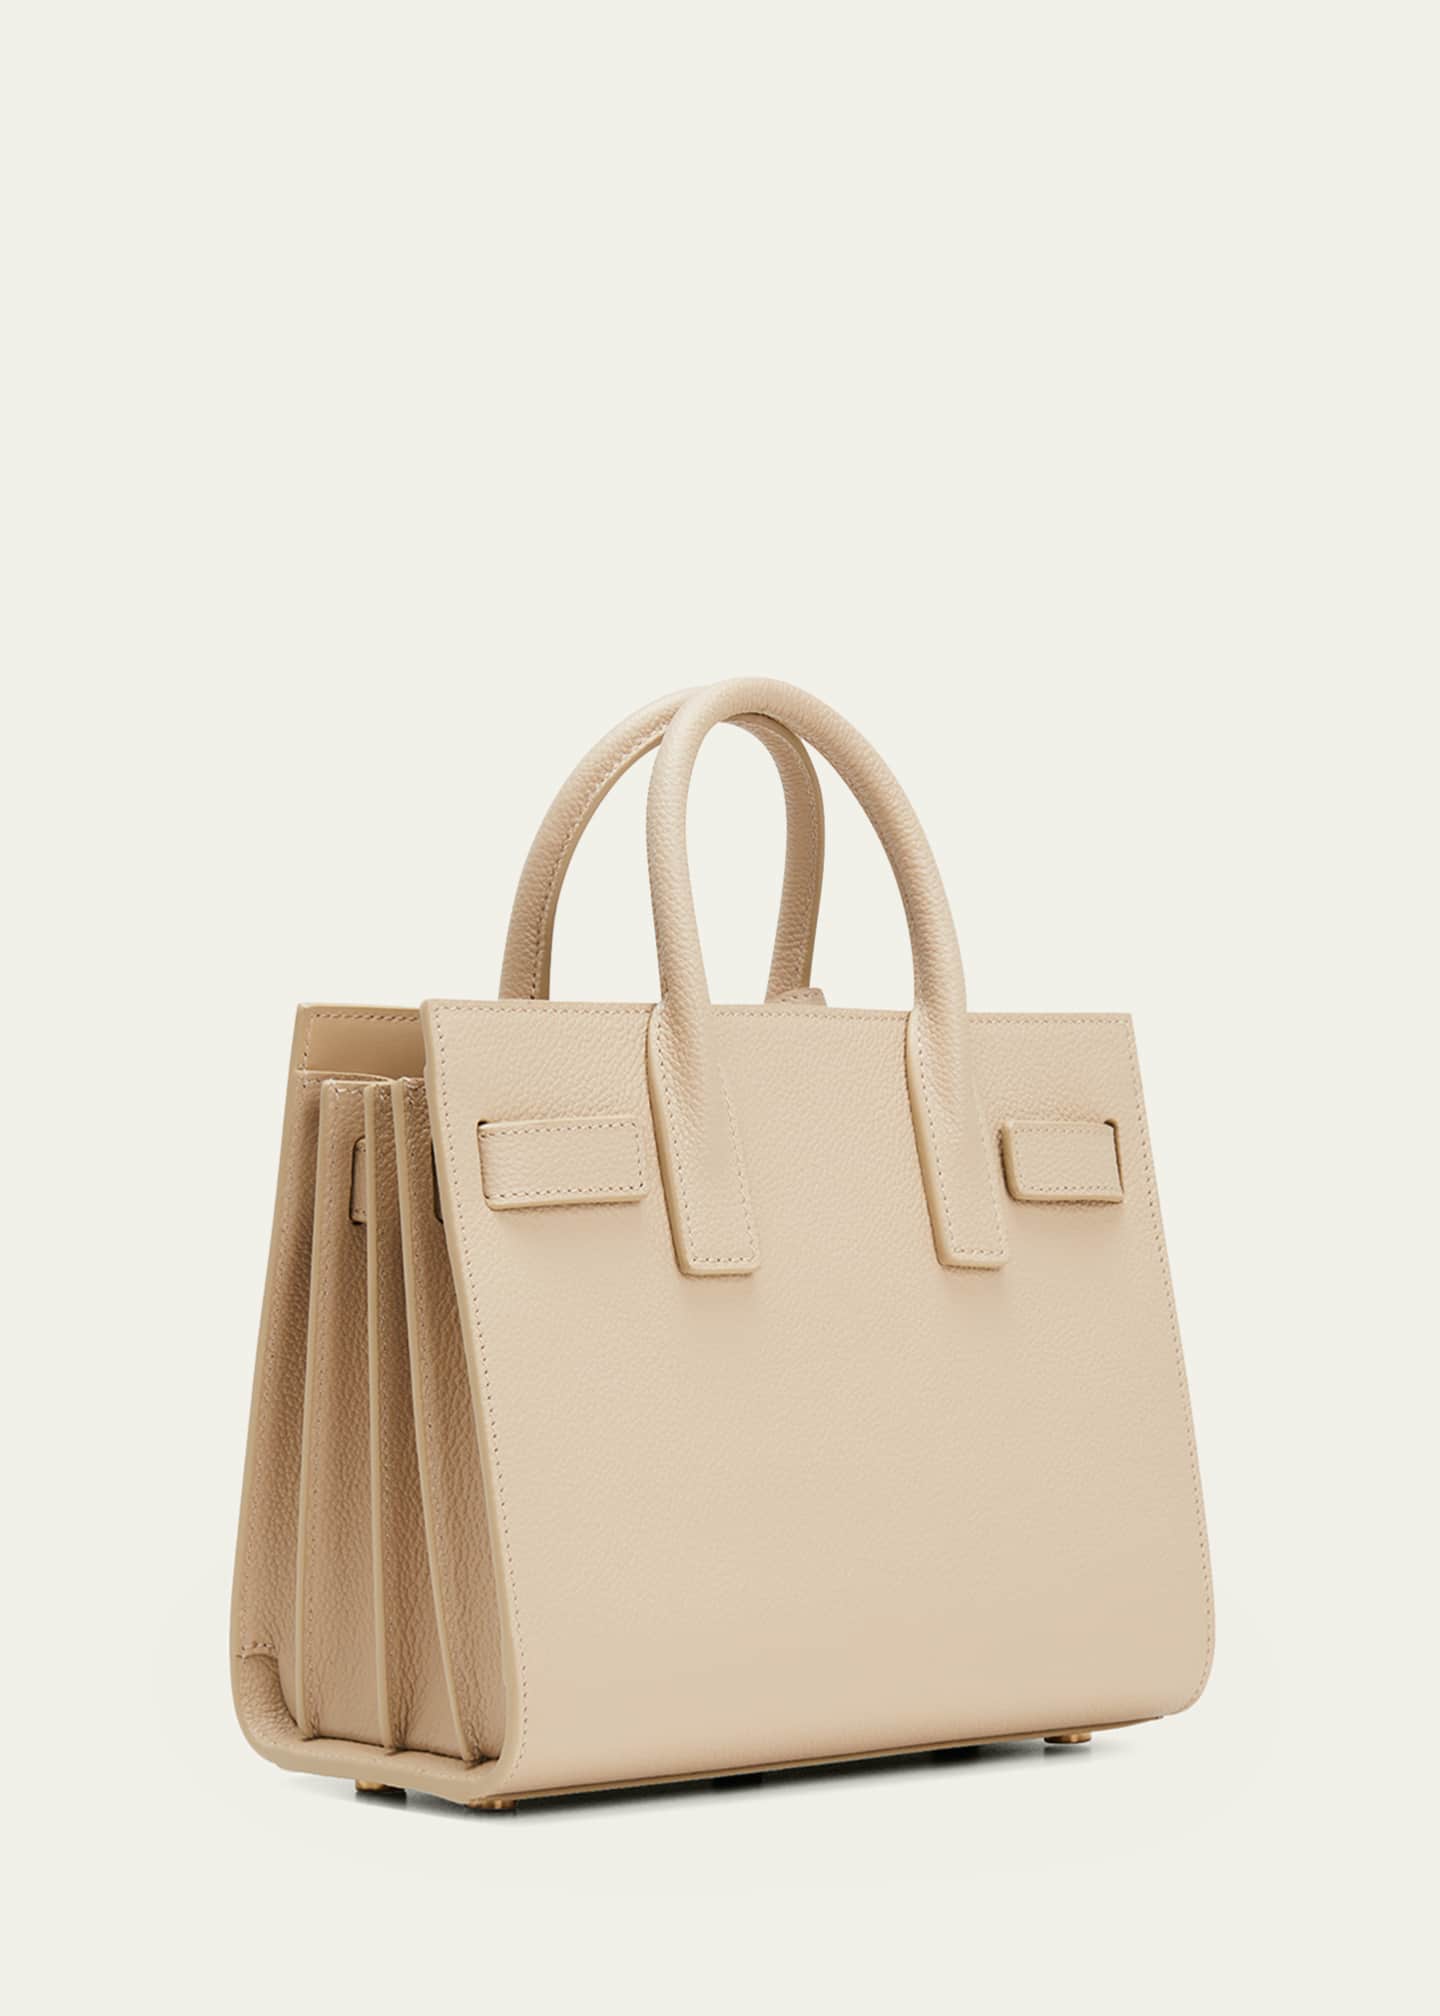 YSL Classic Sac De Jour Baby Smooth Leather Bag, Beige